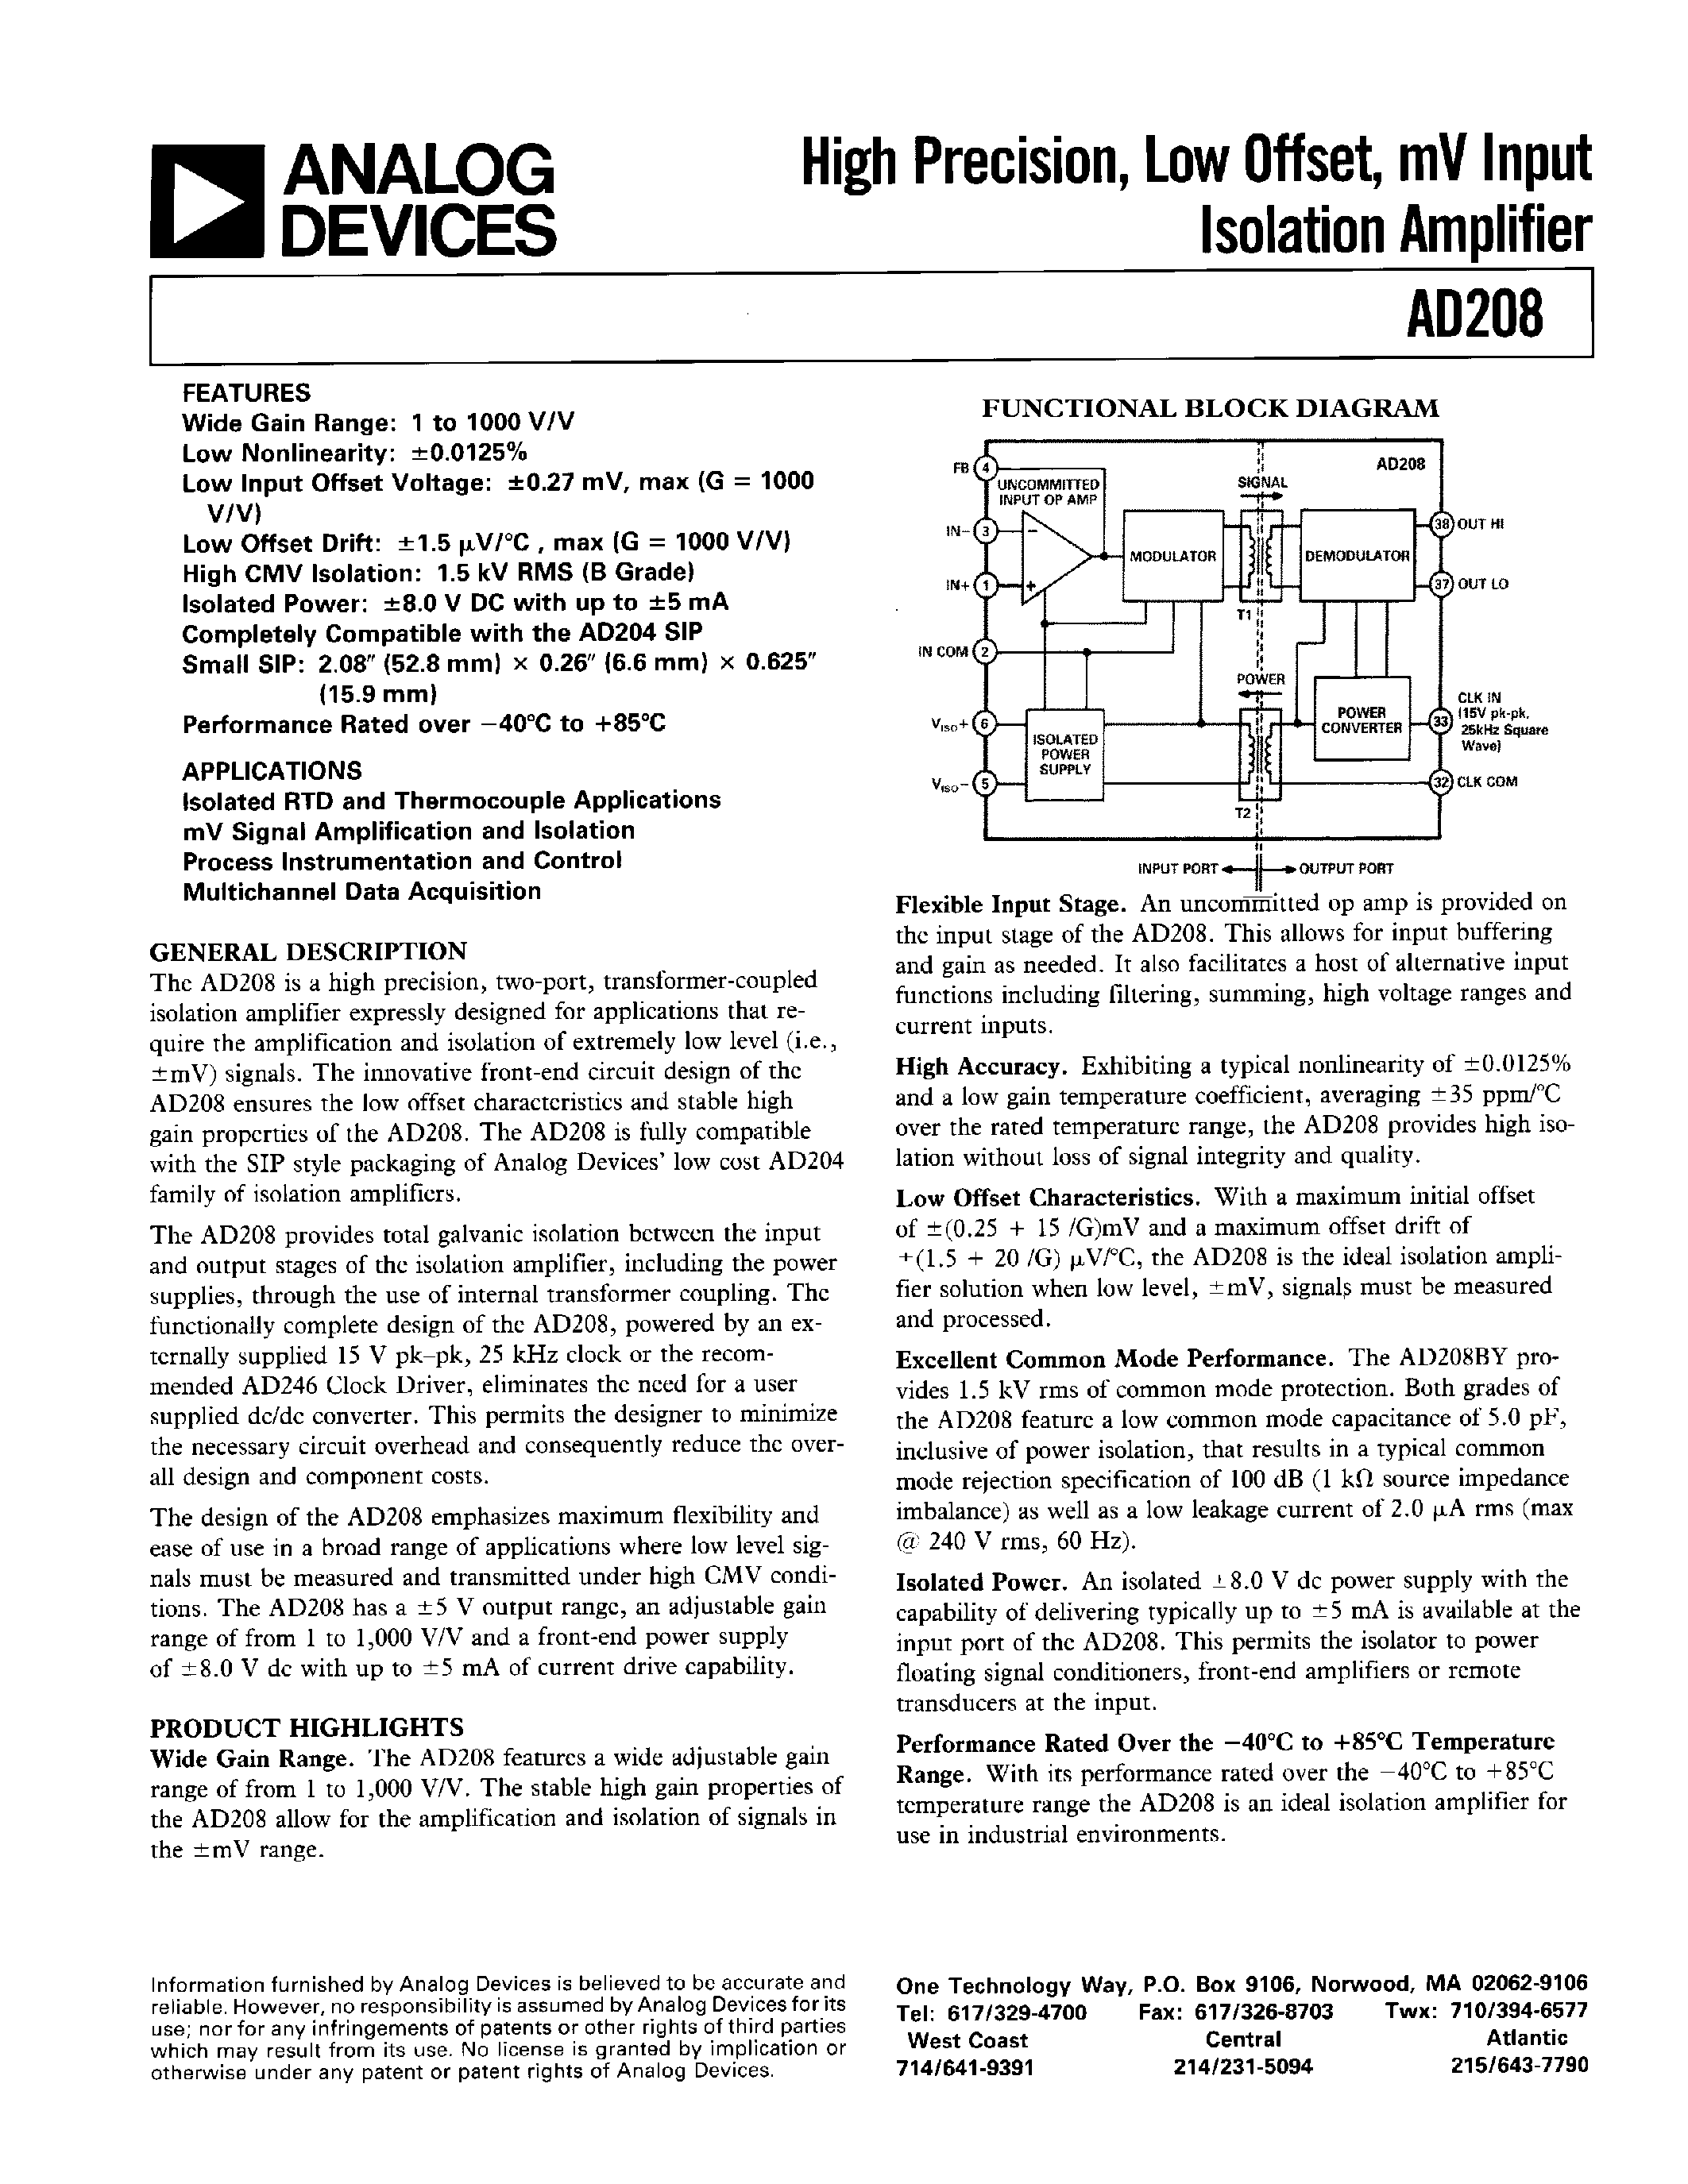 Datasheet AD208 - High Precision/ Low Offset/ mV Input Isolation Amplifier page 1